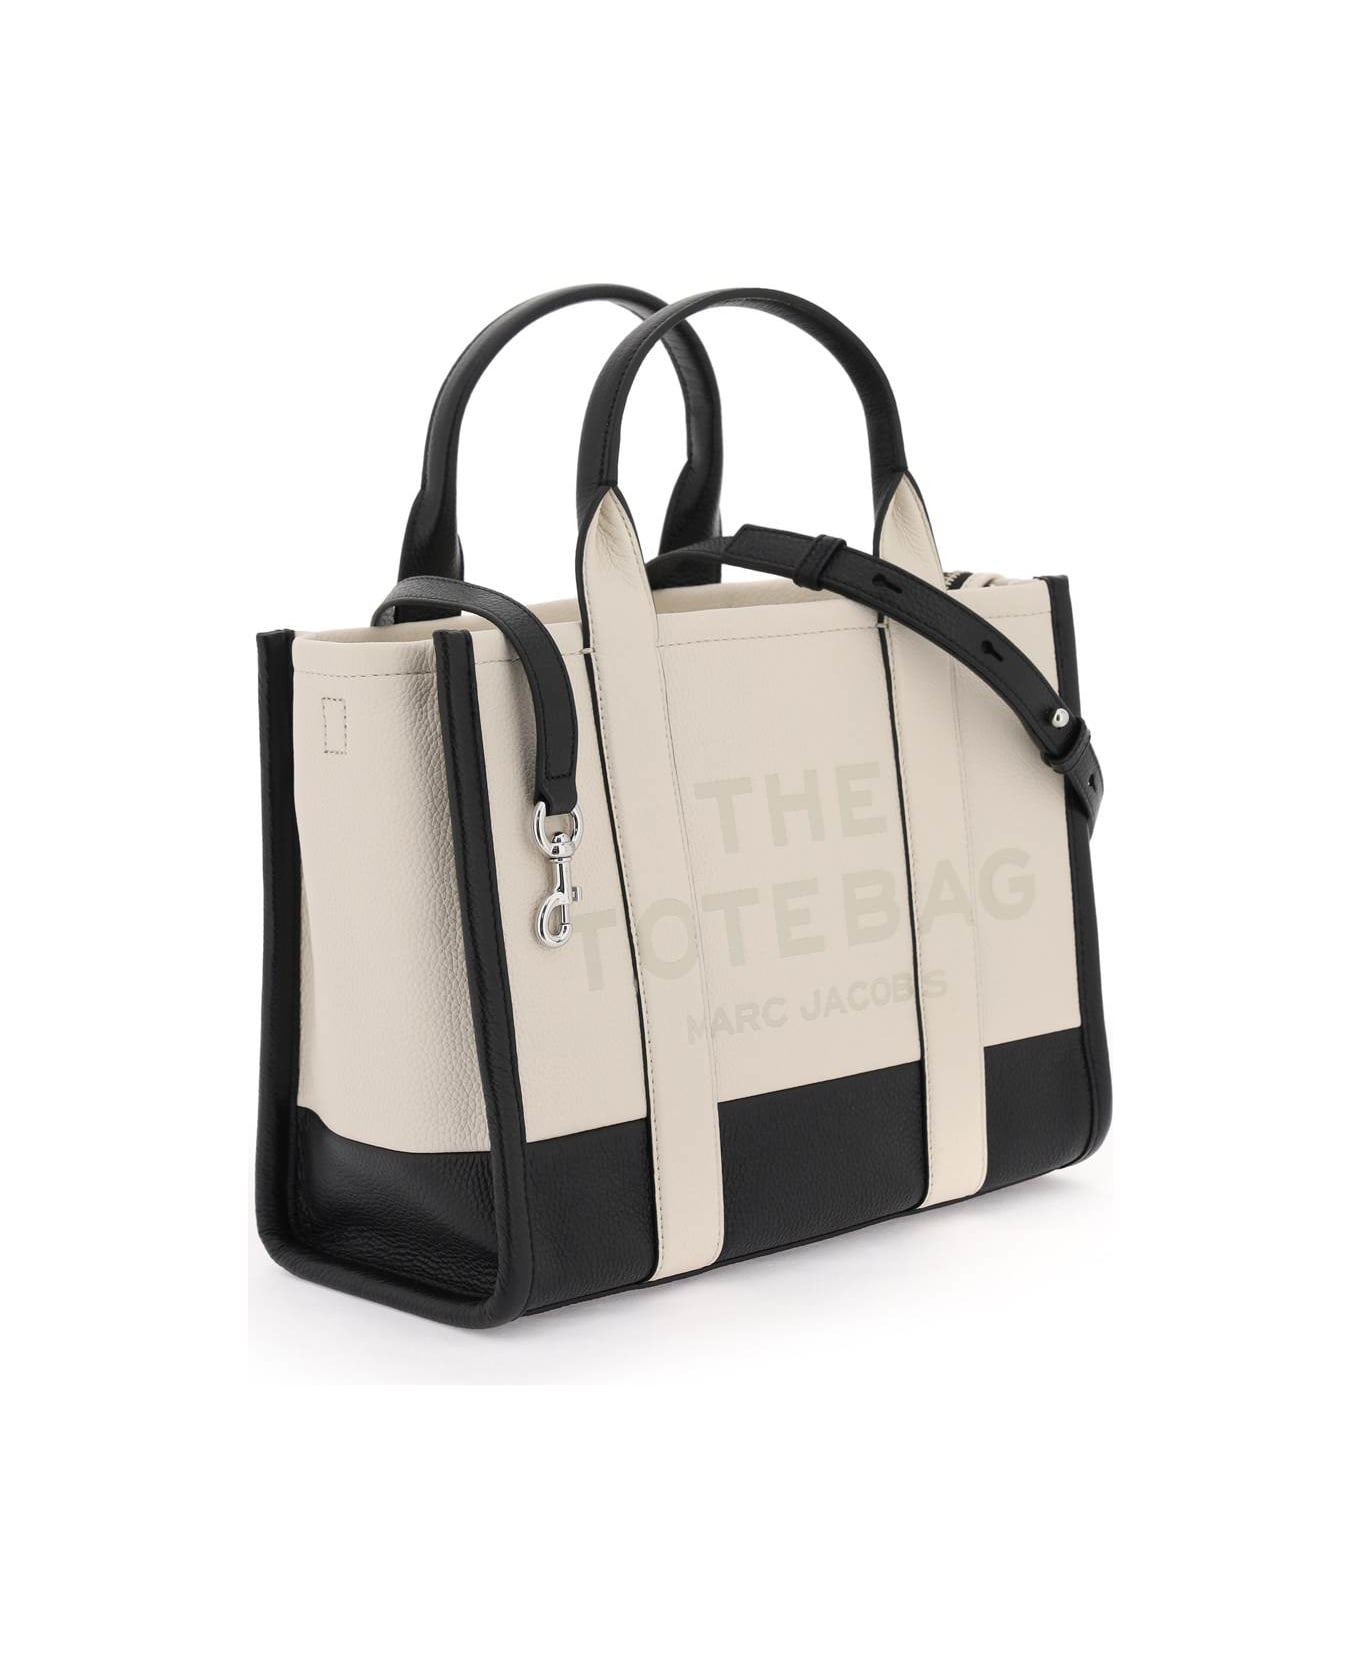 Marc Jacobs The Colorblock Medium Tote Bag - Ivory